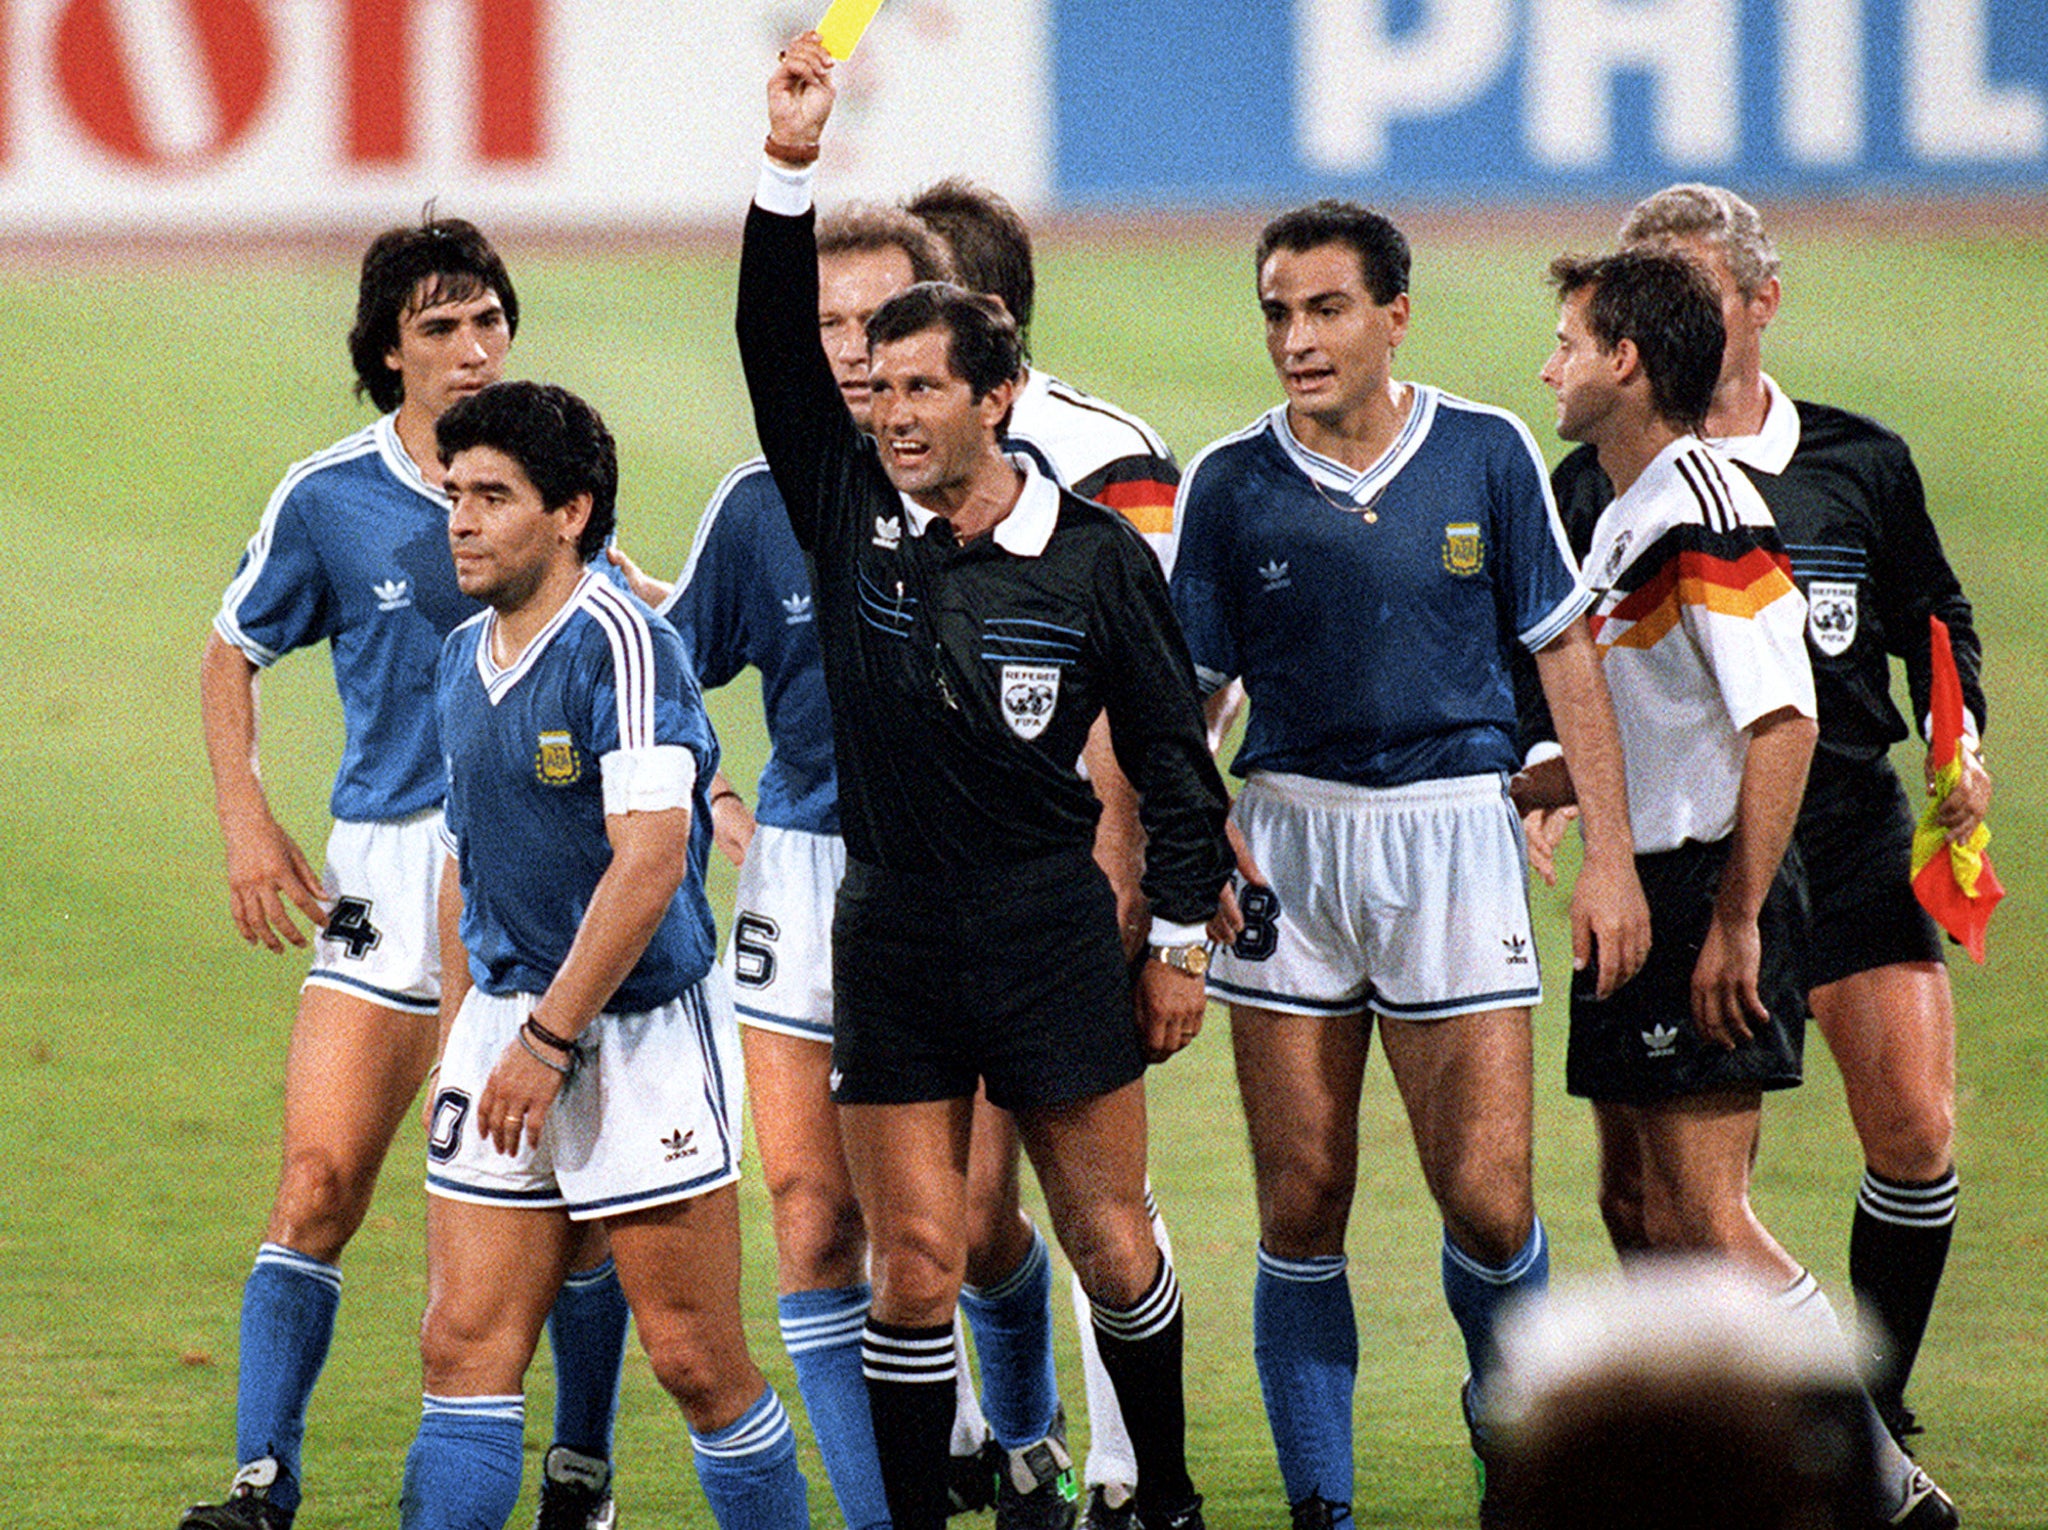 It all went wrong at the 1990 World Cup